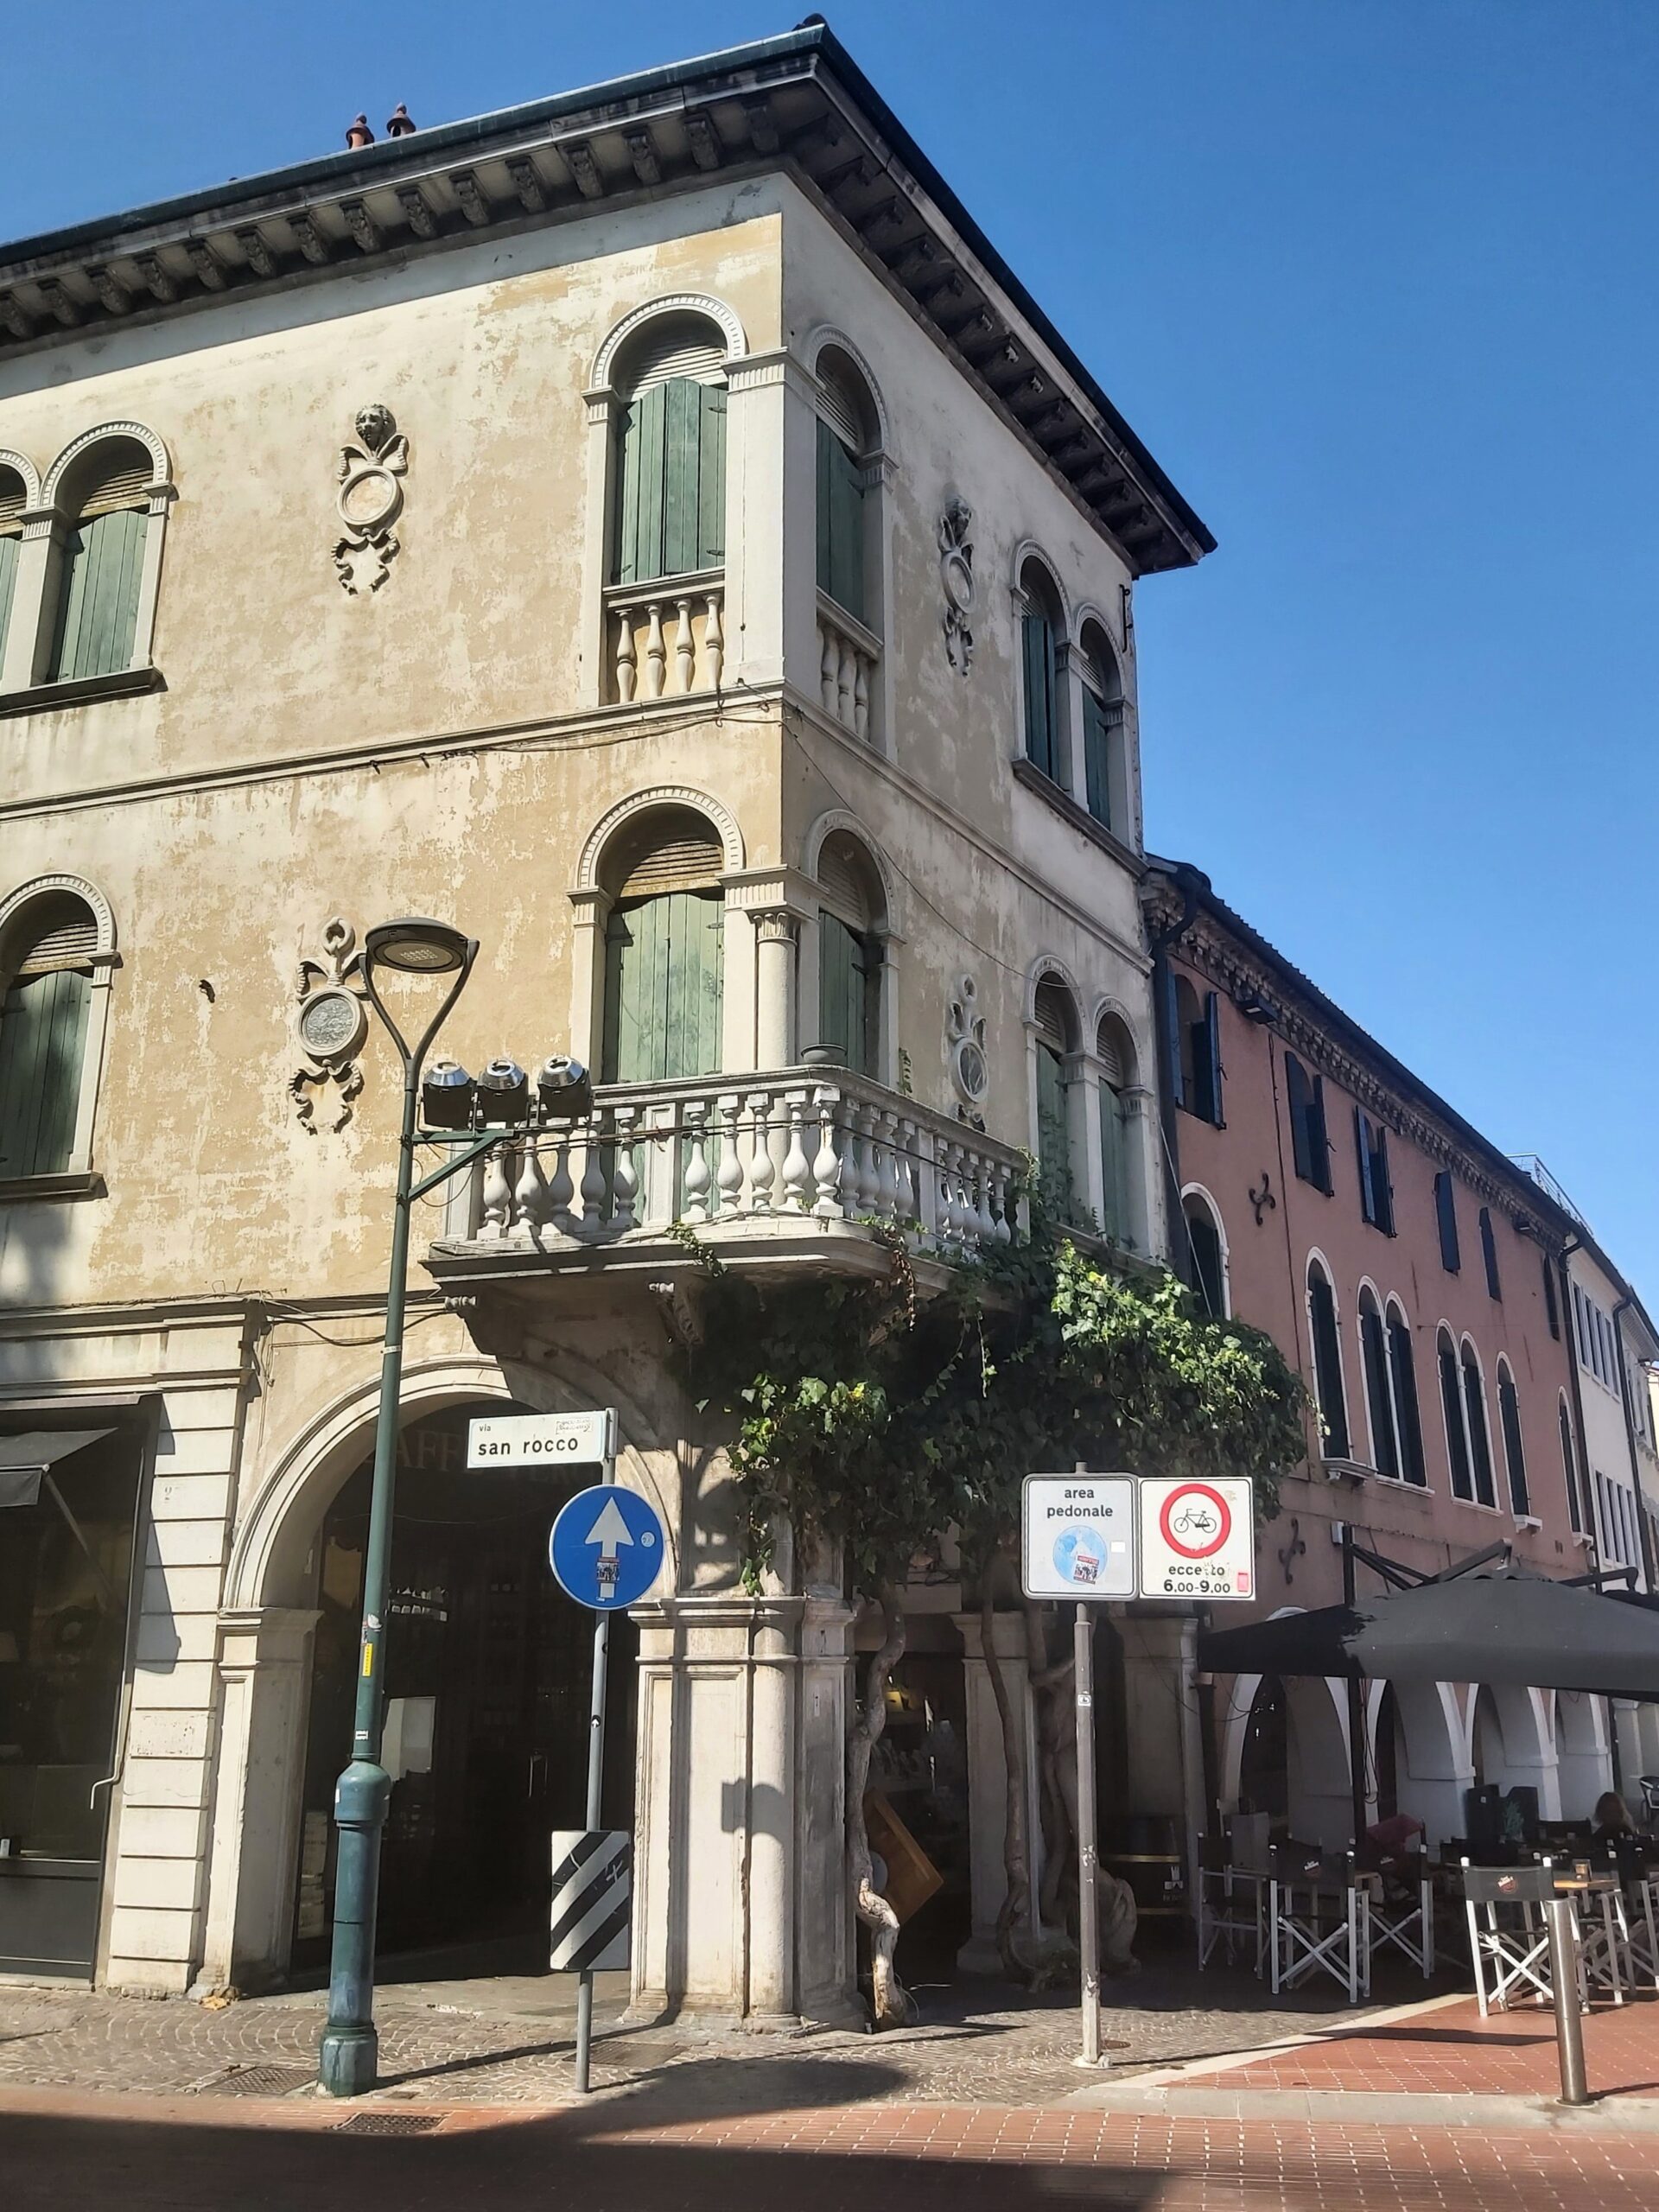 Pretty buildings with a balcony on the corner in Mestre, Italy